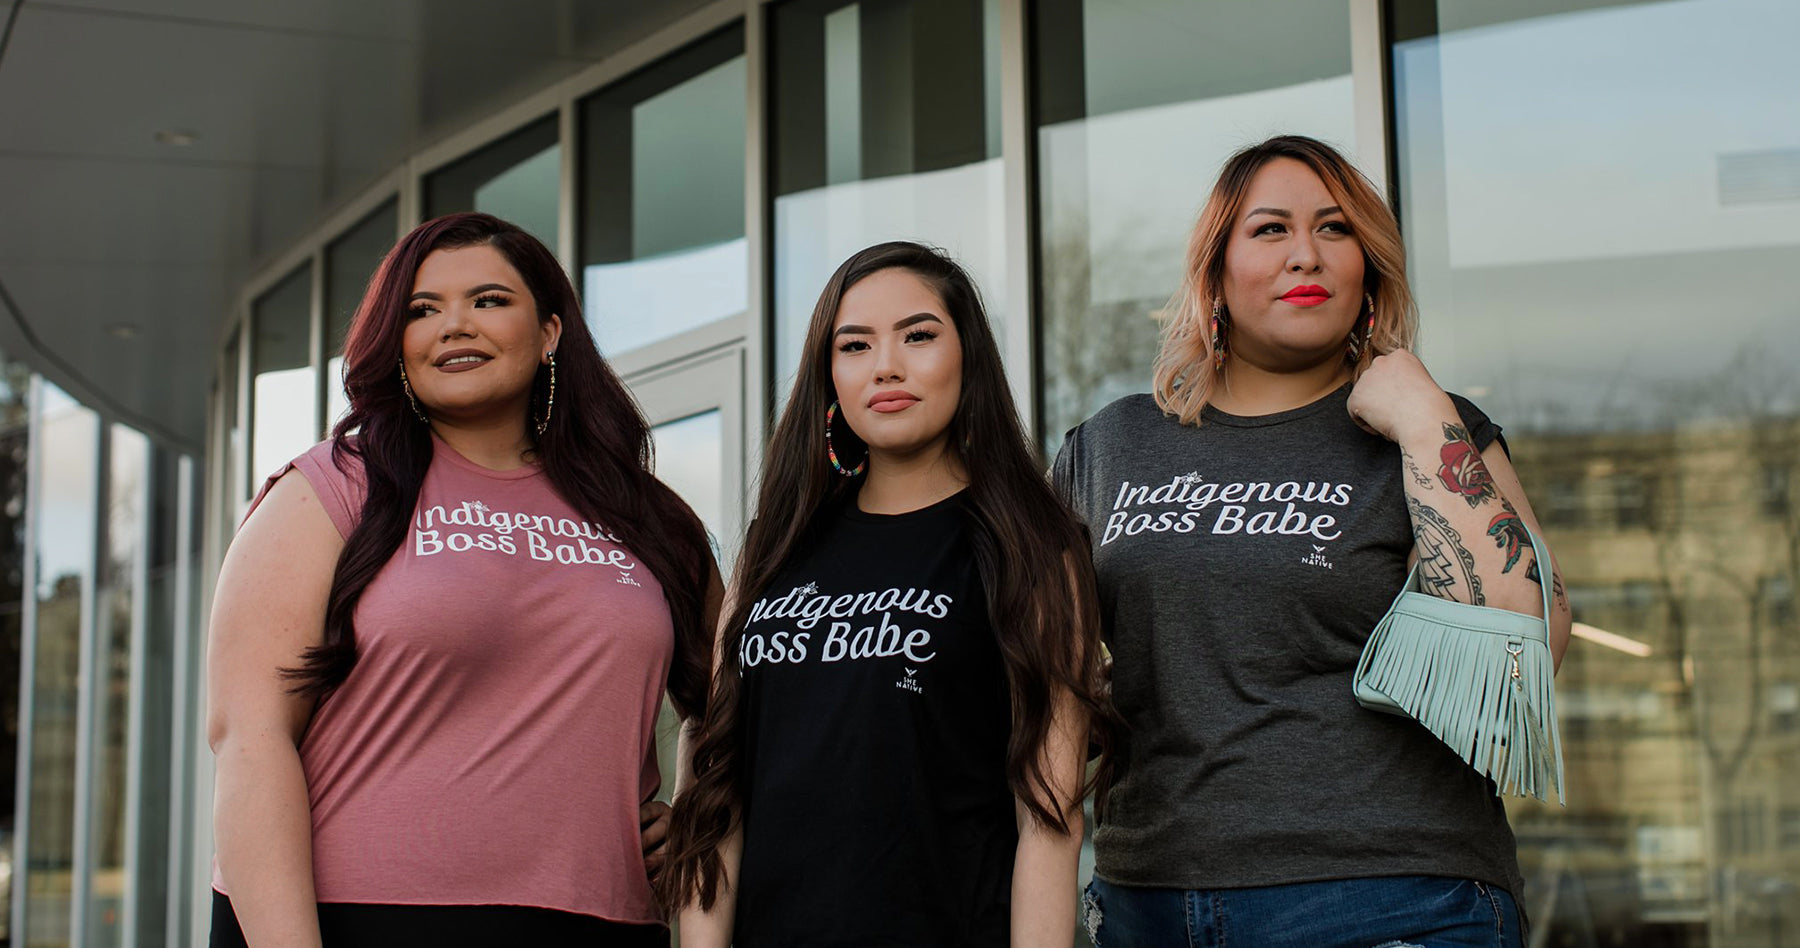 Photograph of three Indigenous women wearing t-shirts that read Indigenous Boss Babe created by the brand SheNative